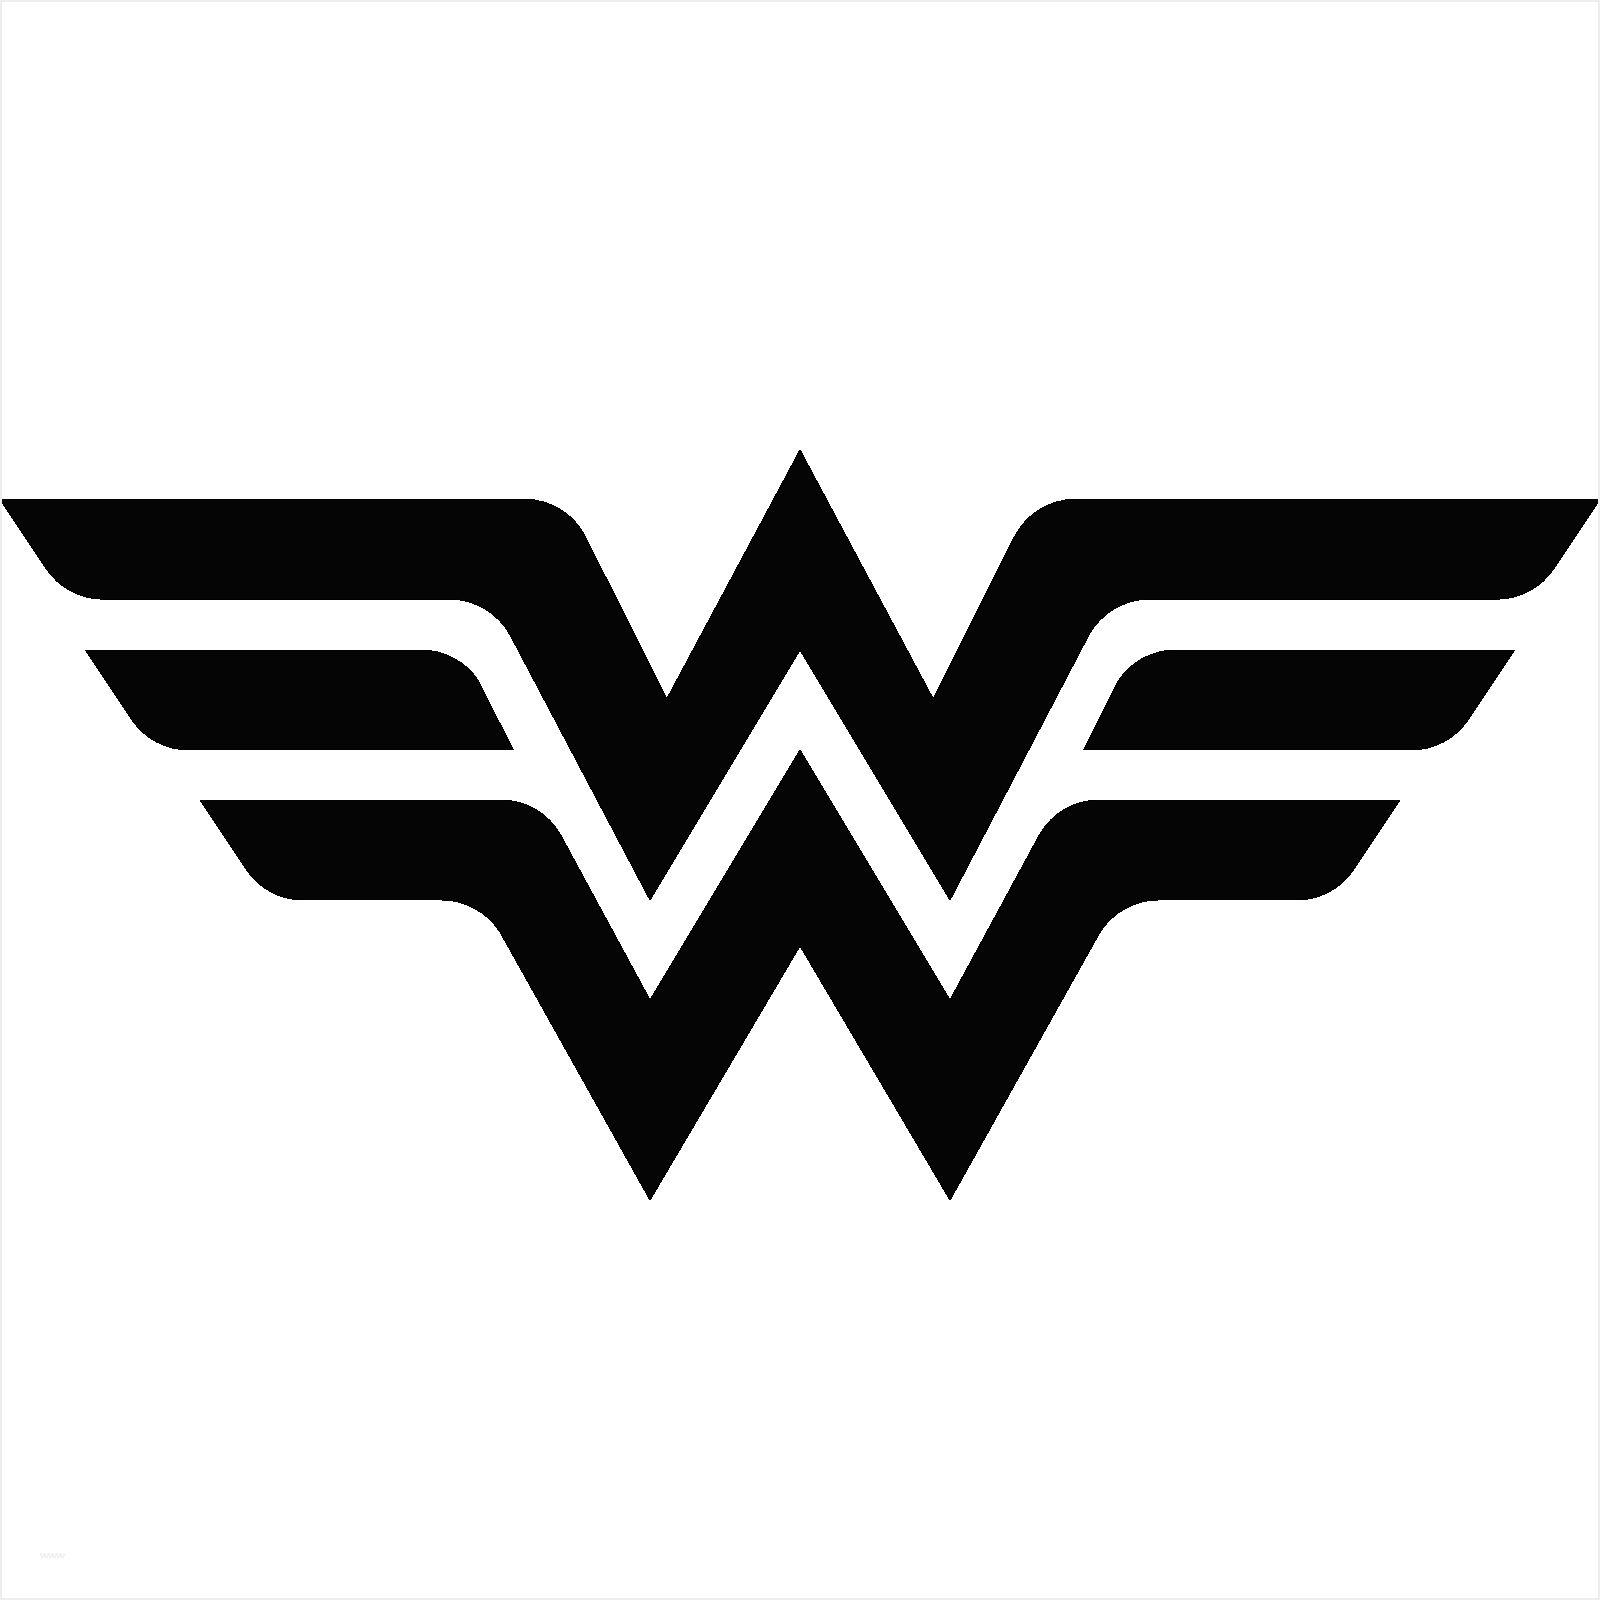 Awesome Woman Logo - 75 Awesome Wonder Woman Logo Template Images | Autos Masestilo ...